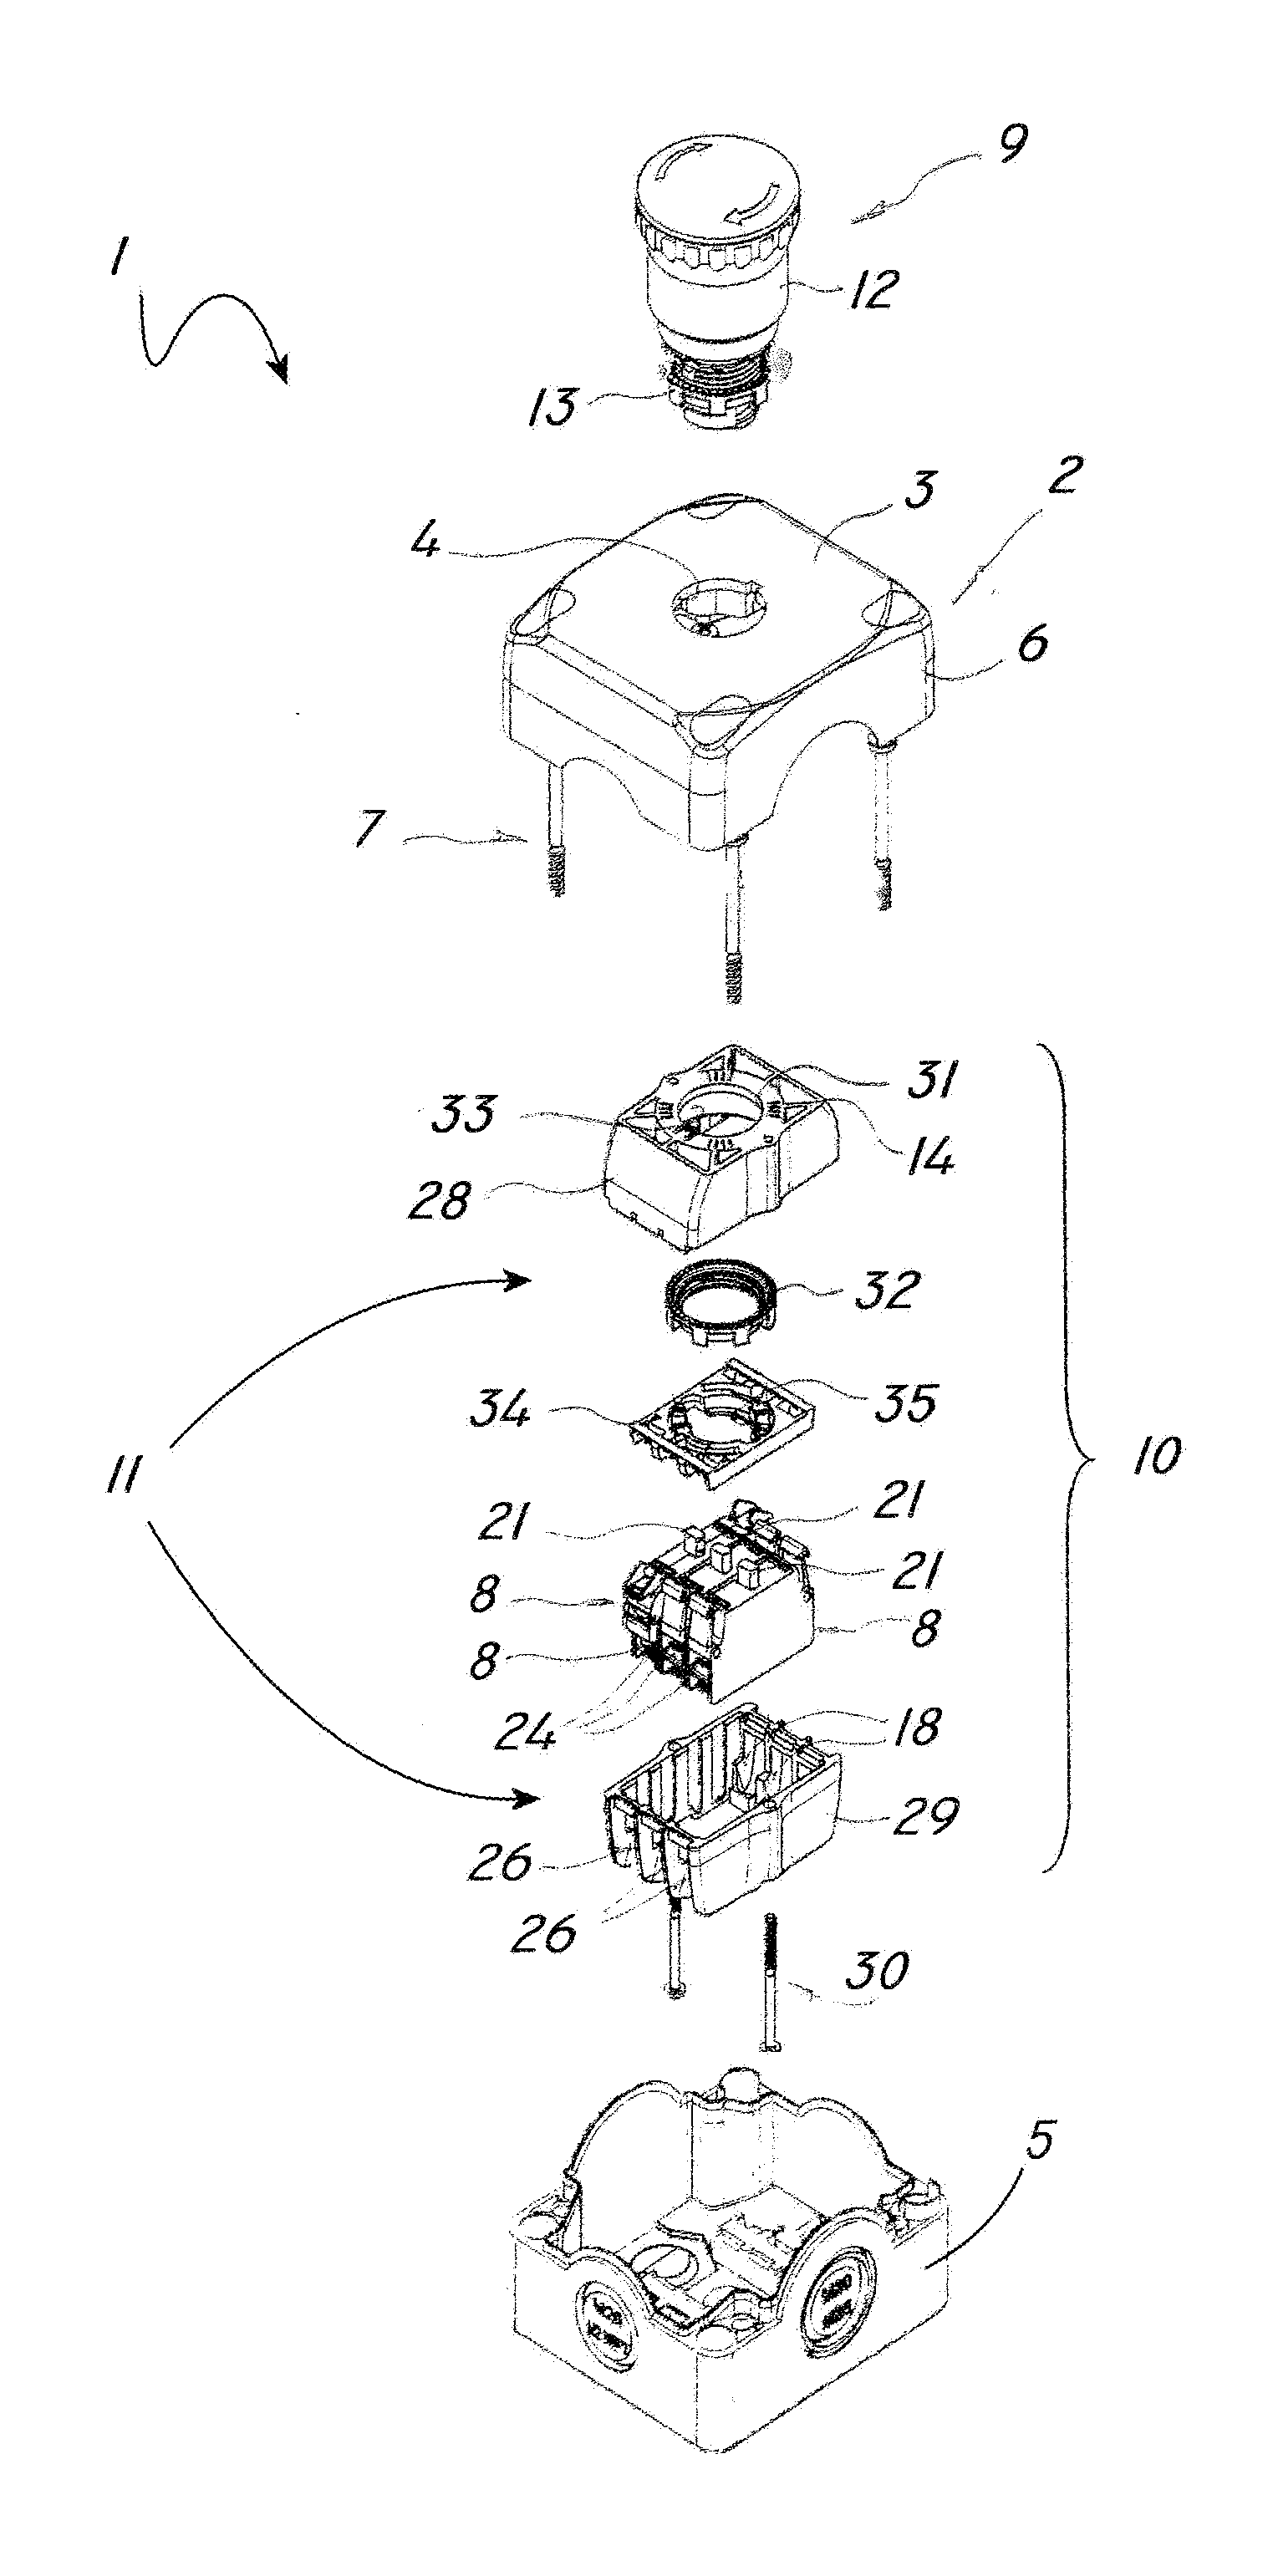 Switch control apparatus for electric plant